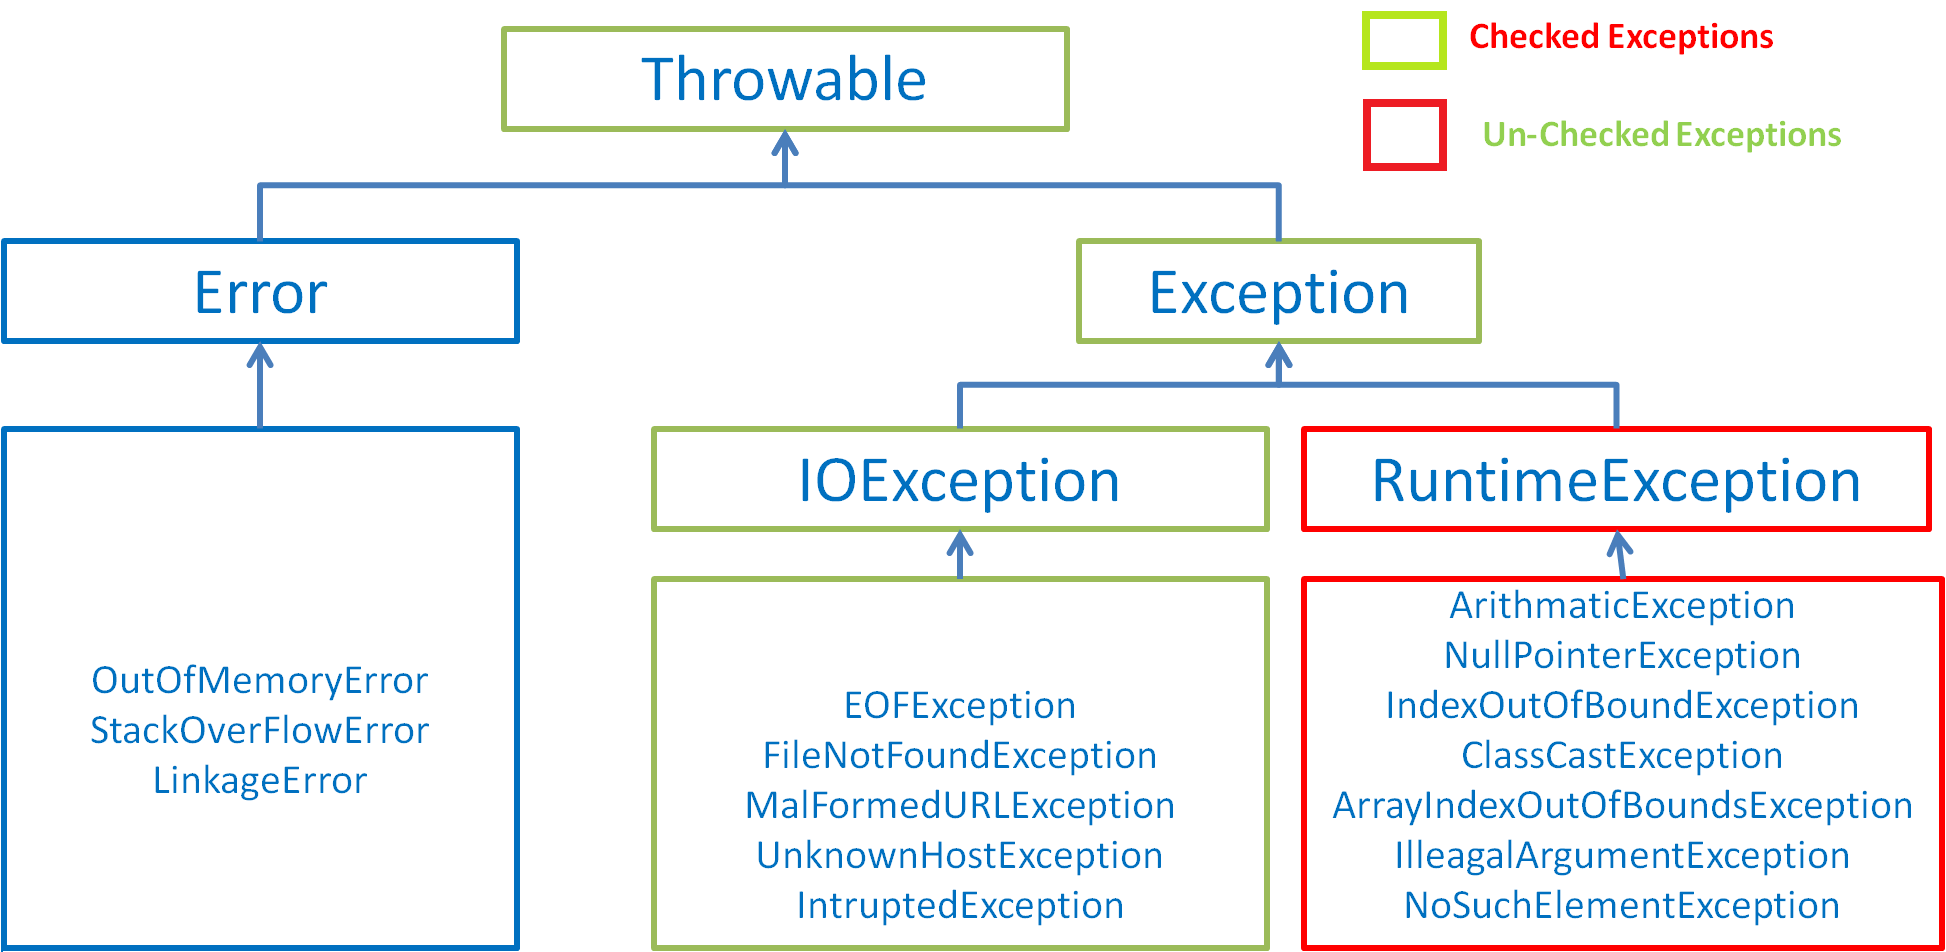 How to handle Exception in Java? CodenBox AutomationLab